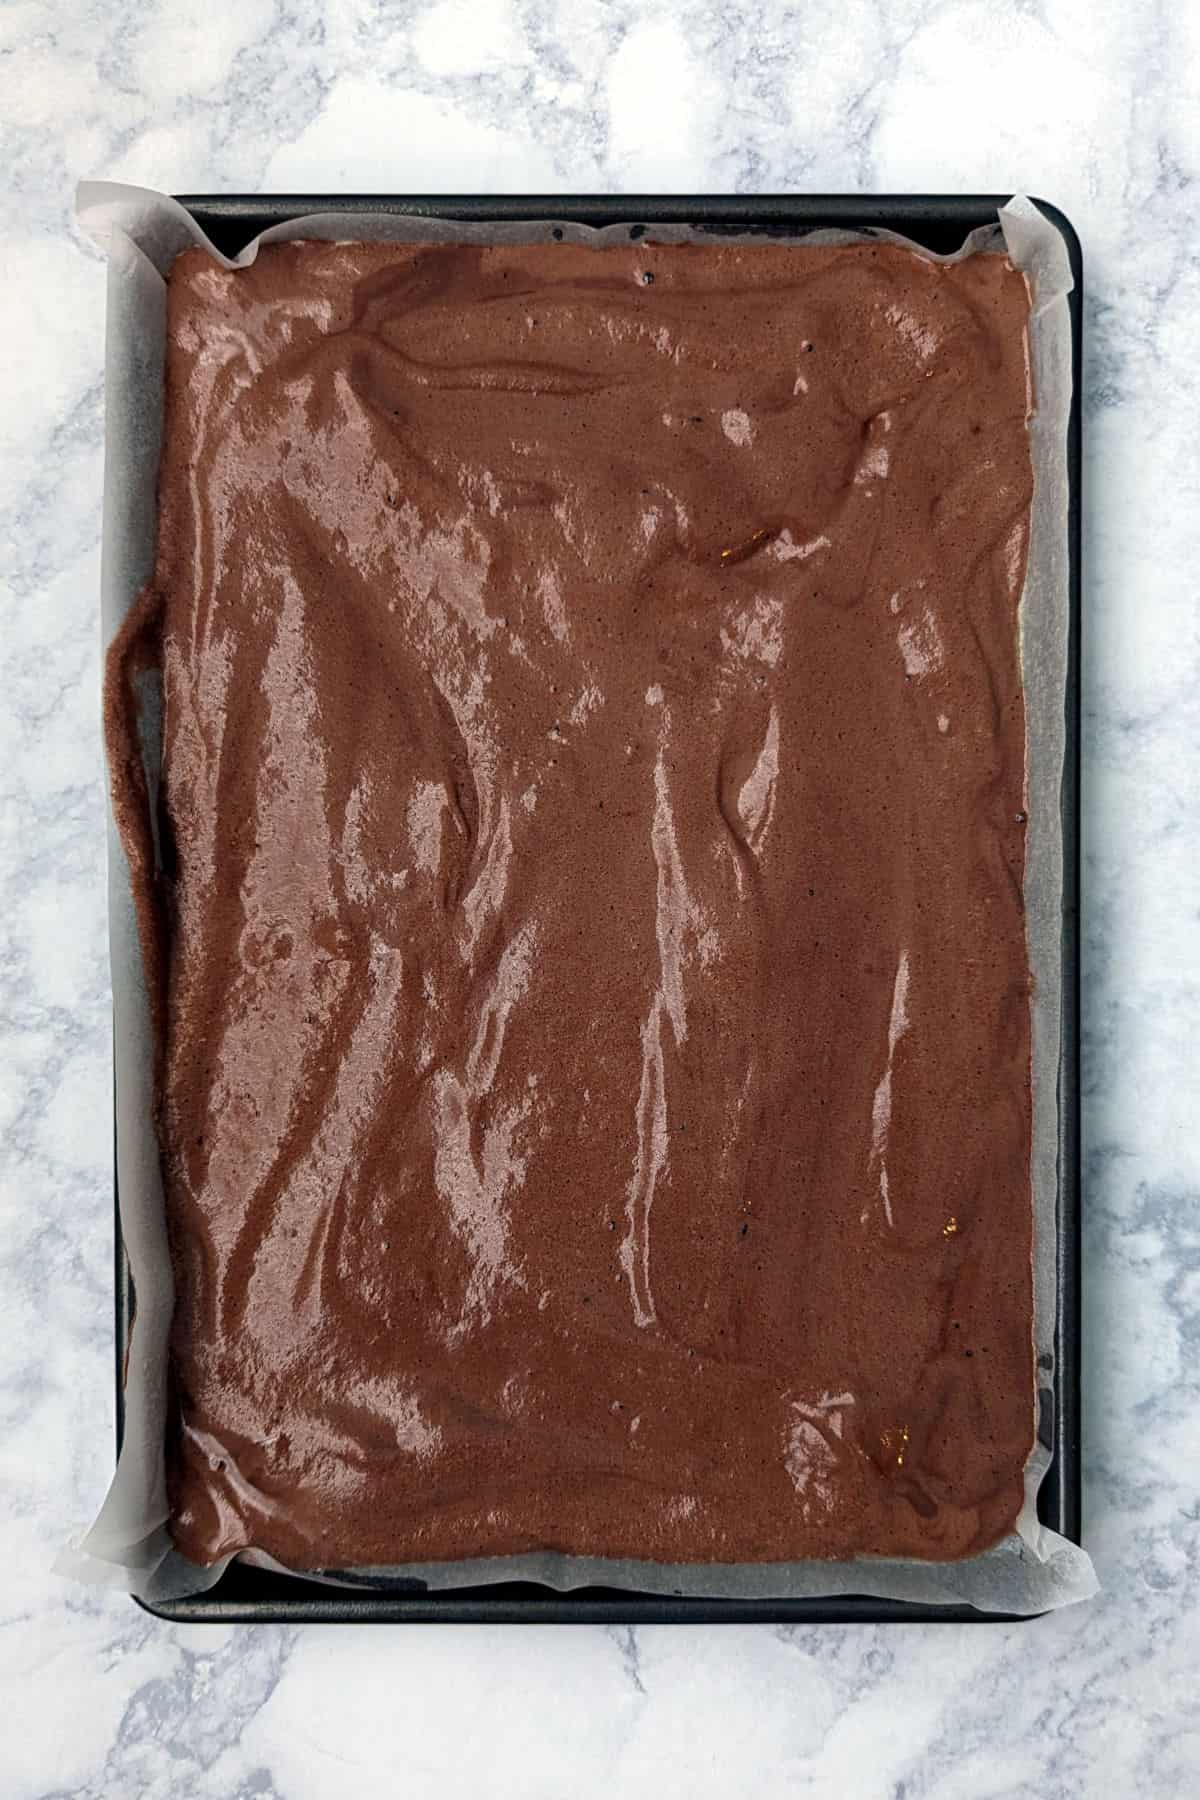 chocolate batter spread to the edges of a jelly roll pan